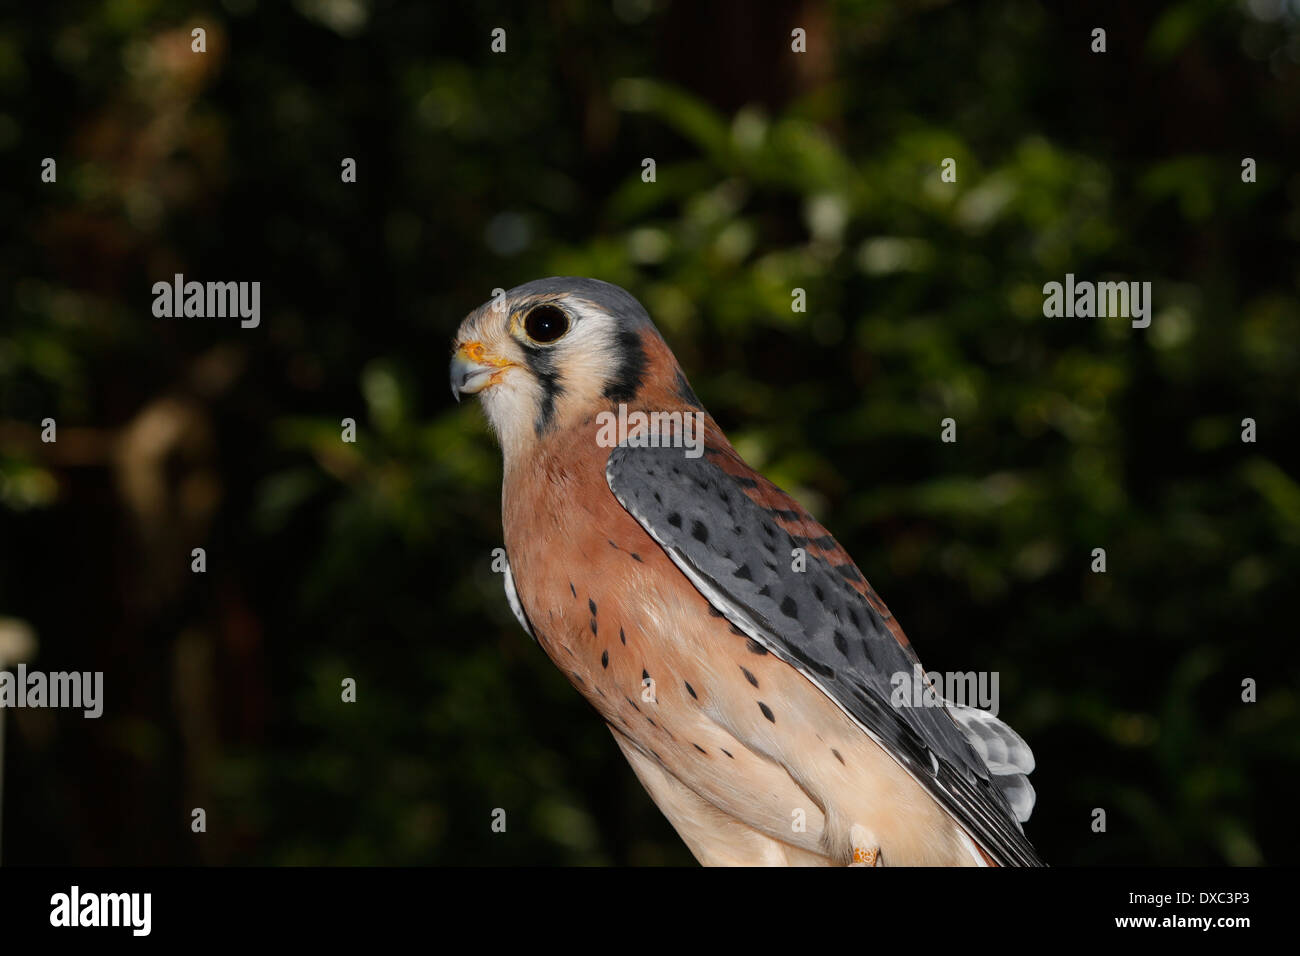 The American Kestrel (Falco sparverius), is sometimes  known as the Sparrow Hawk, is a small falcon Stock Photo